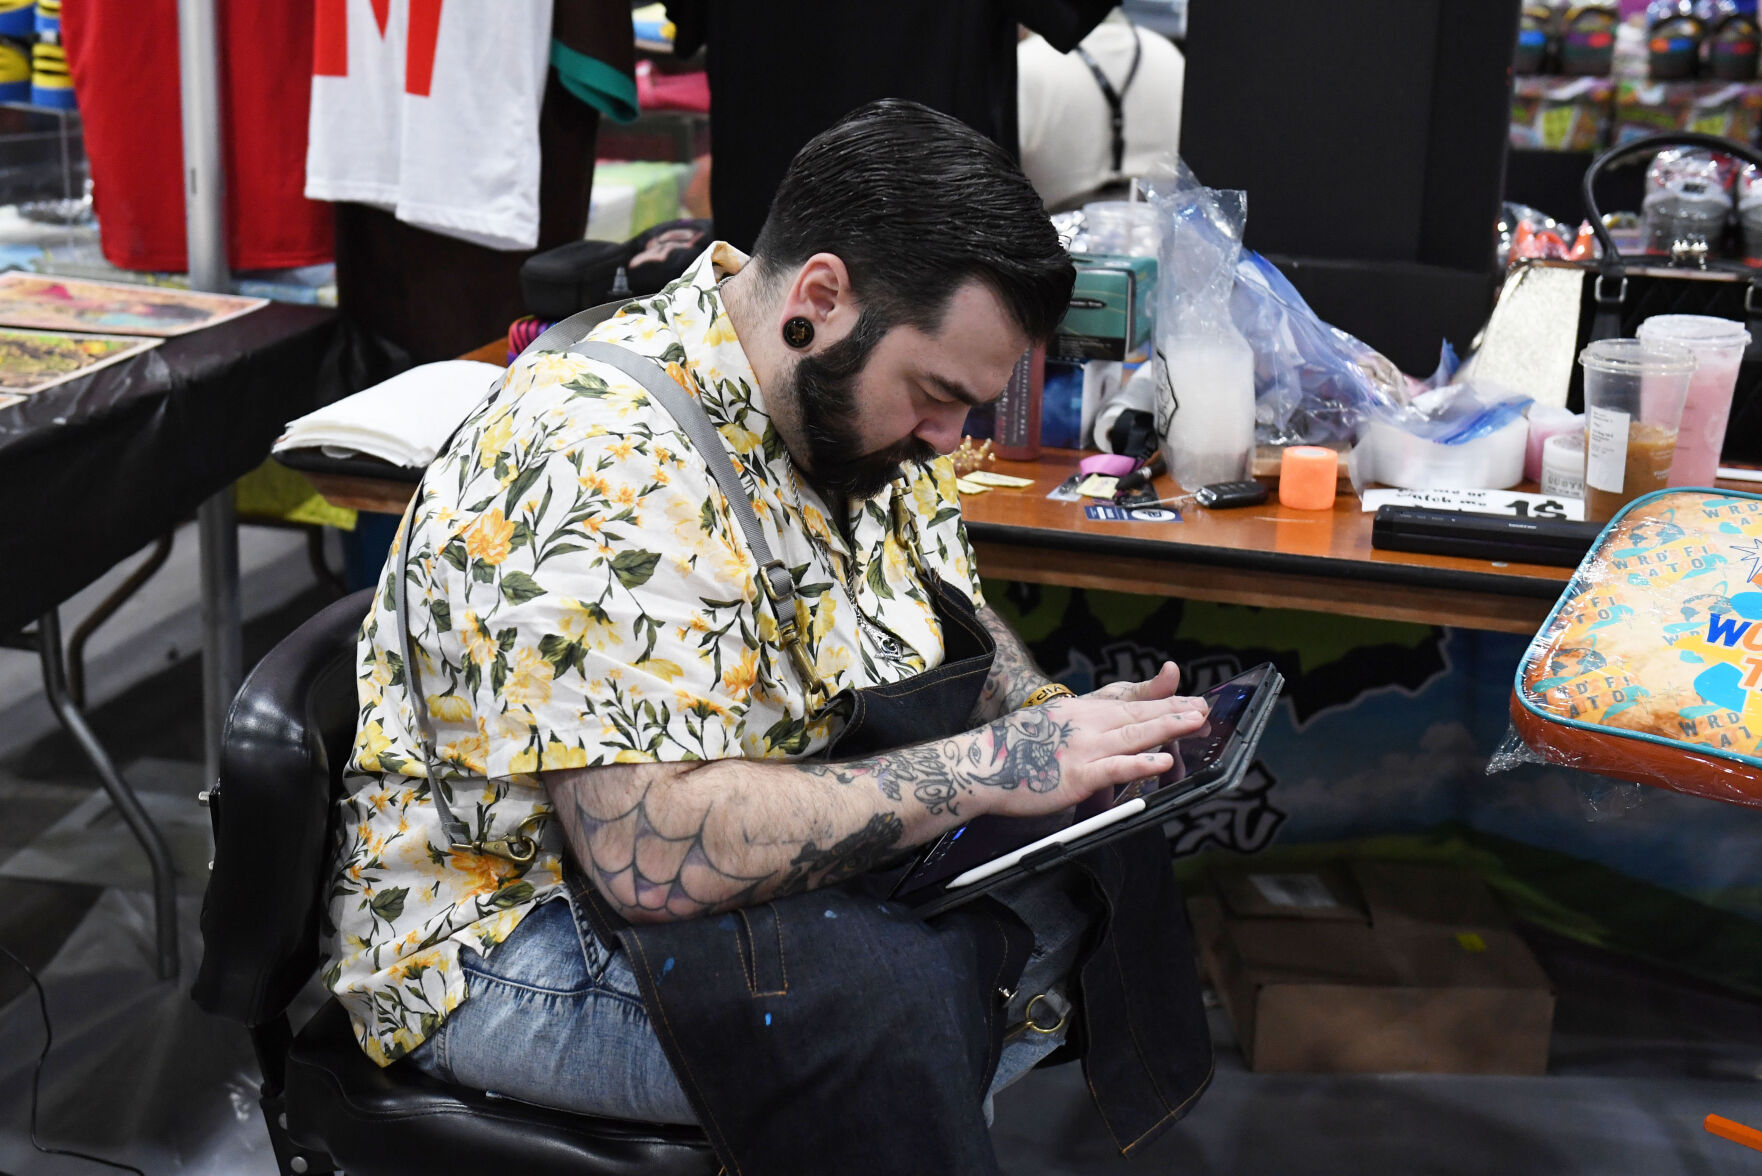 Tattoo convention will leave its mark on Limerick